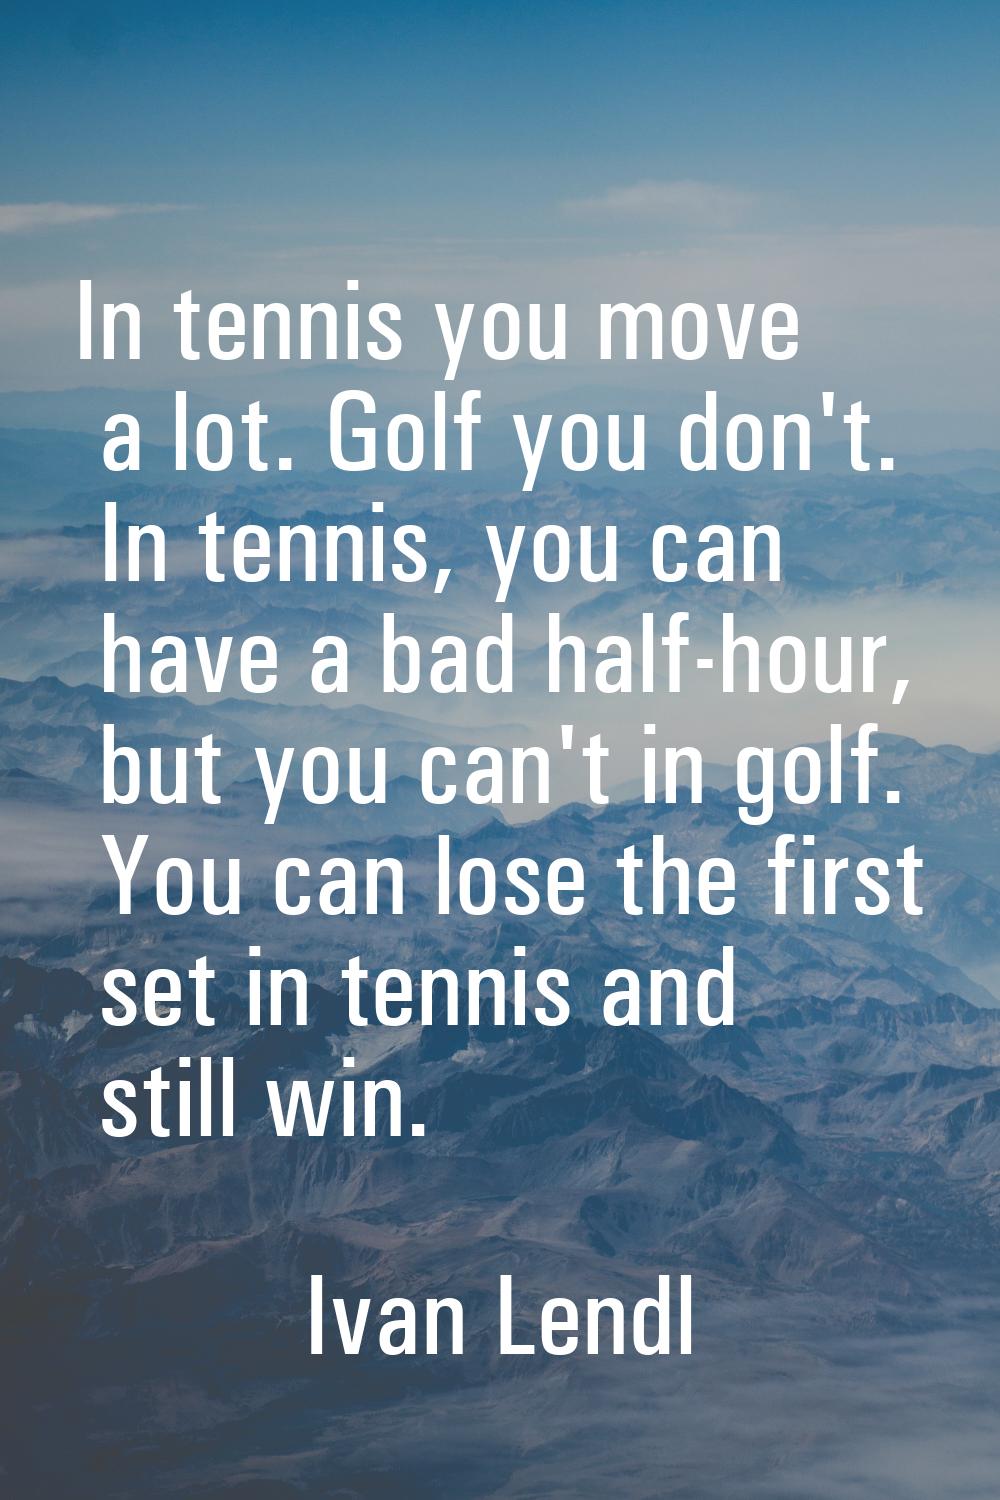 In tennis you move a lot. Golf you don't. In tennis, you can have a bad half-hour, but you can't in